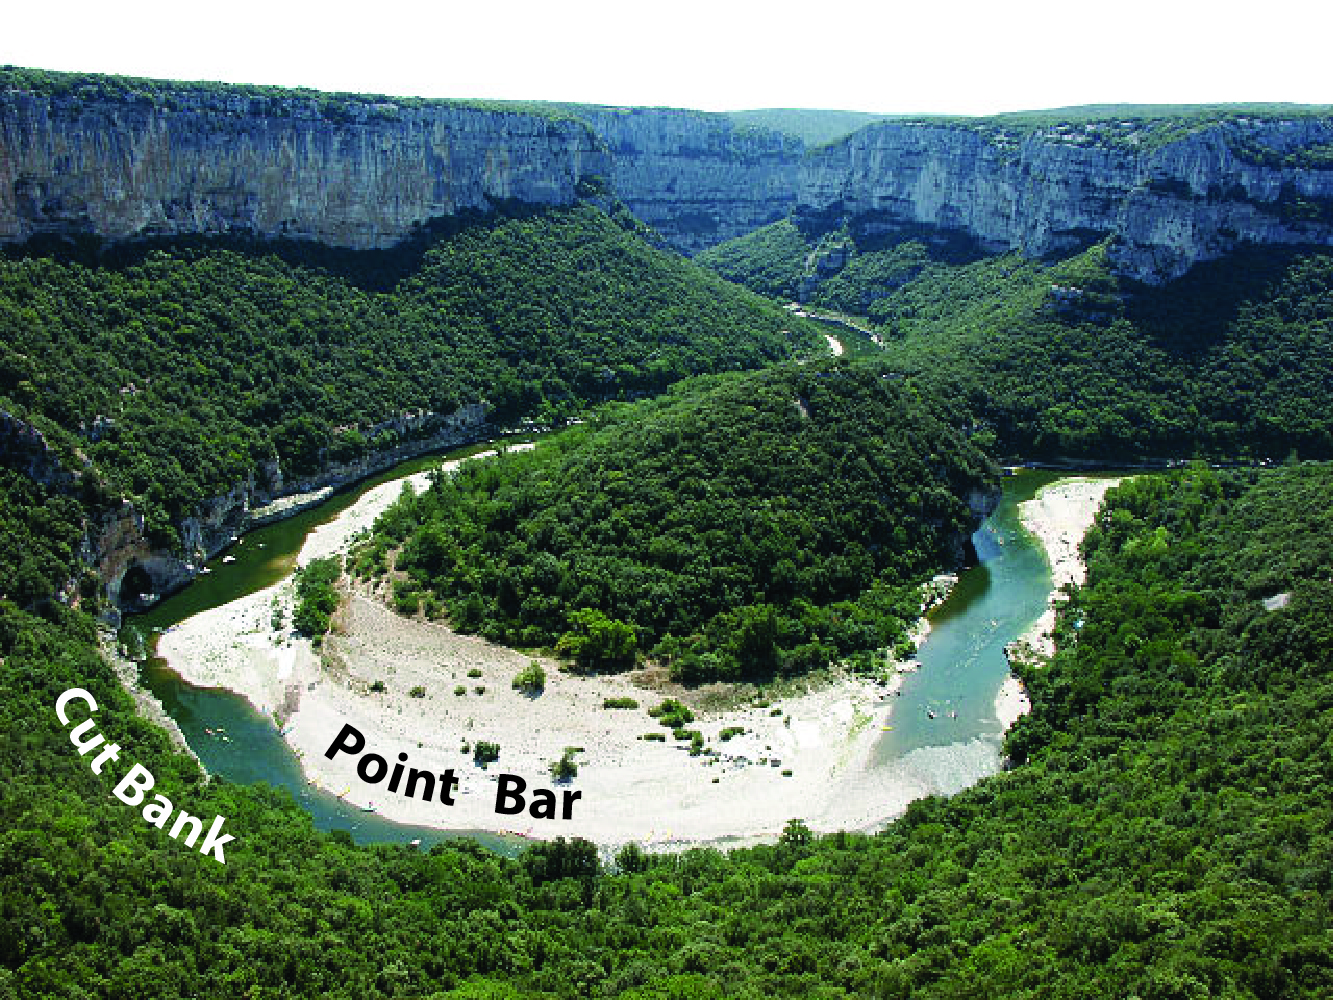 Sandy deposition at the inside of a bend (point bar) and erosion on the outside of the bend (cut bank) of a river in France.